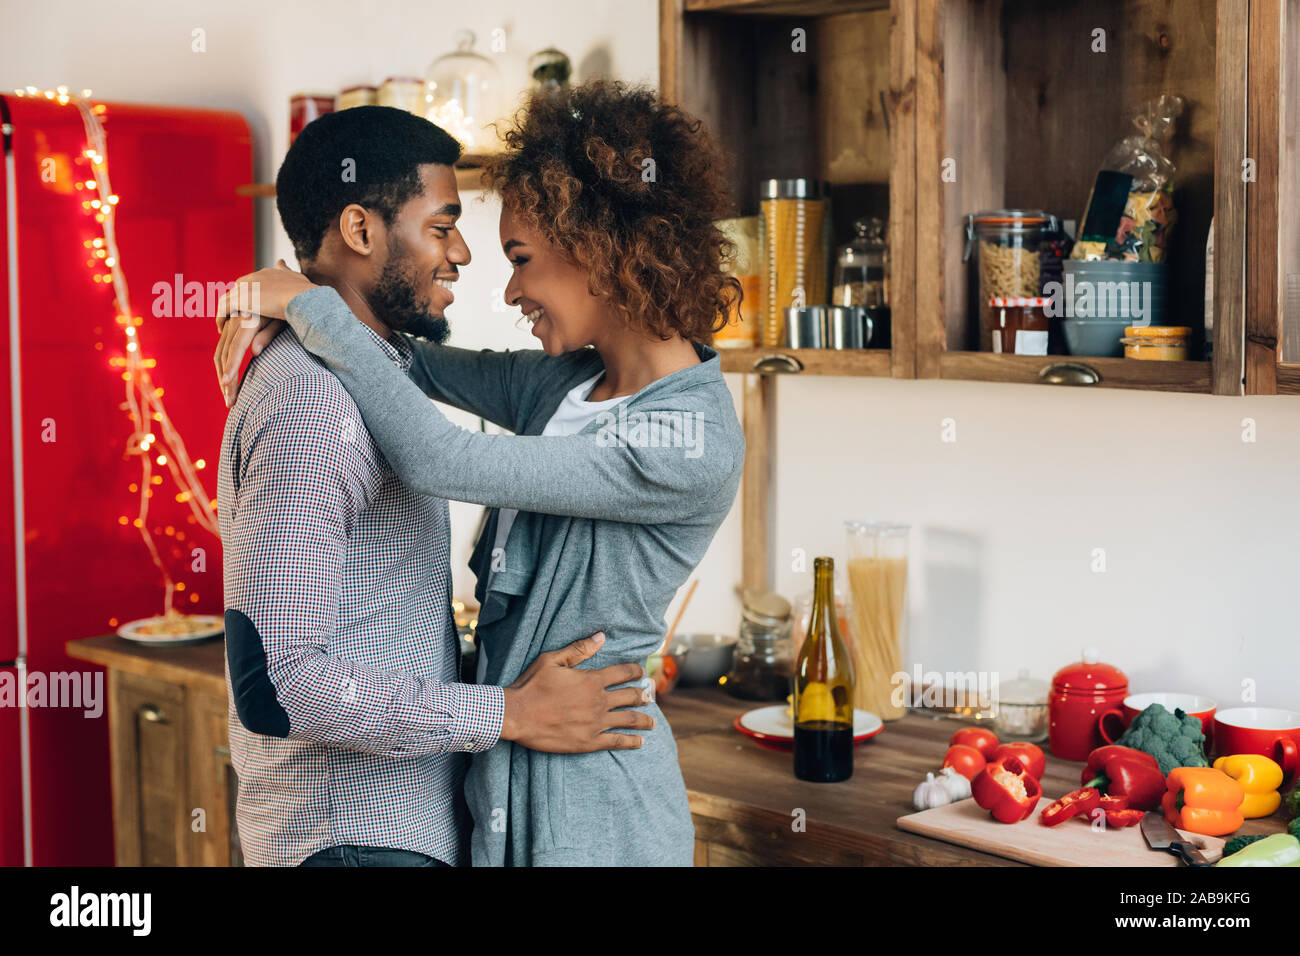 Lovely black couple embracing in cozy kitchen Stock Photo